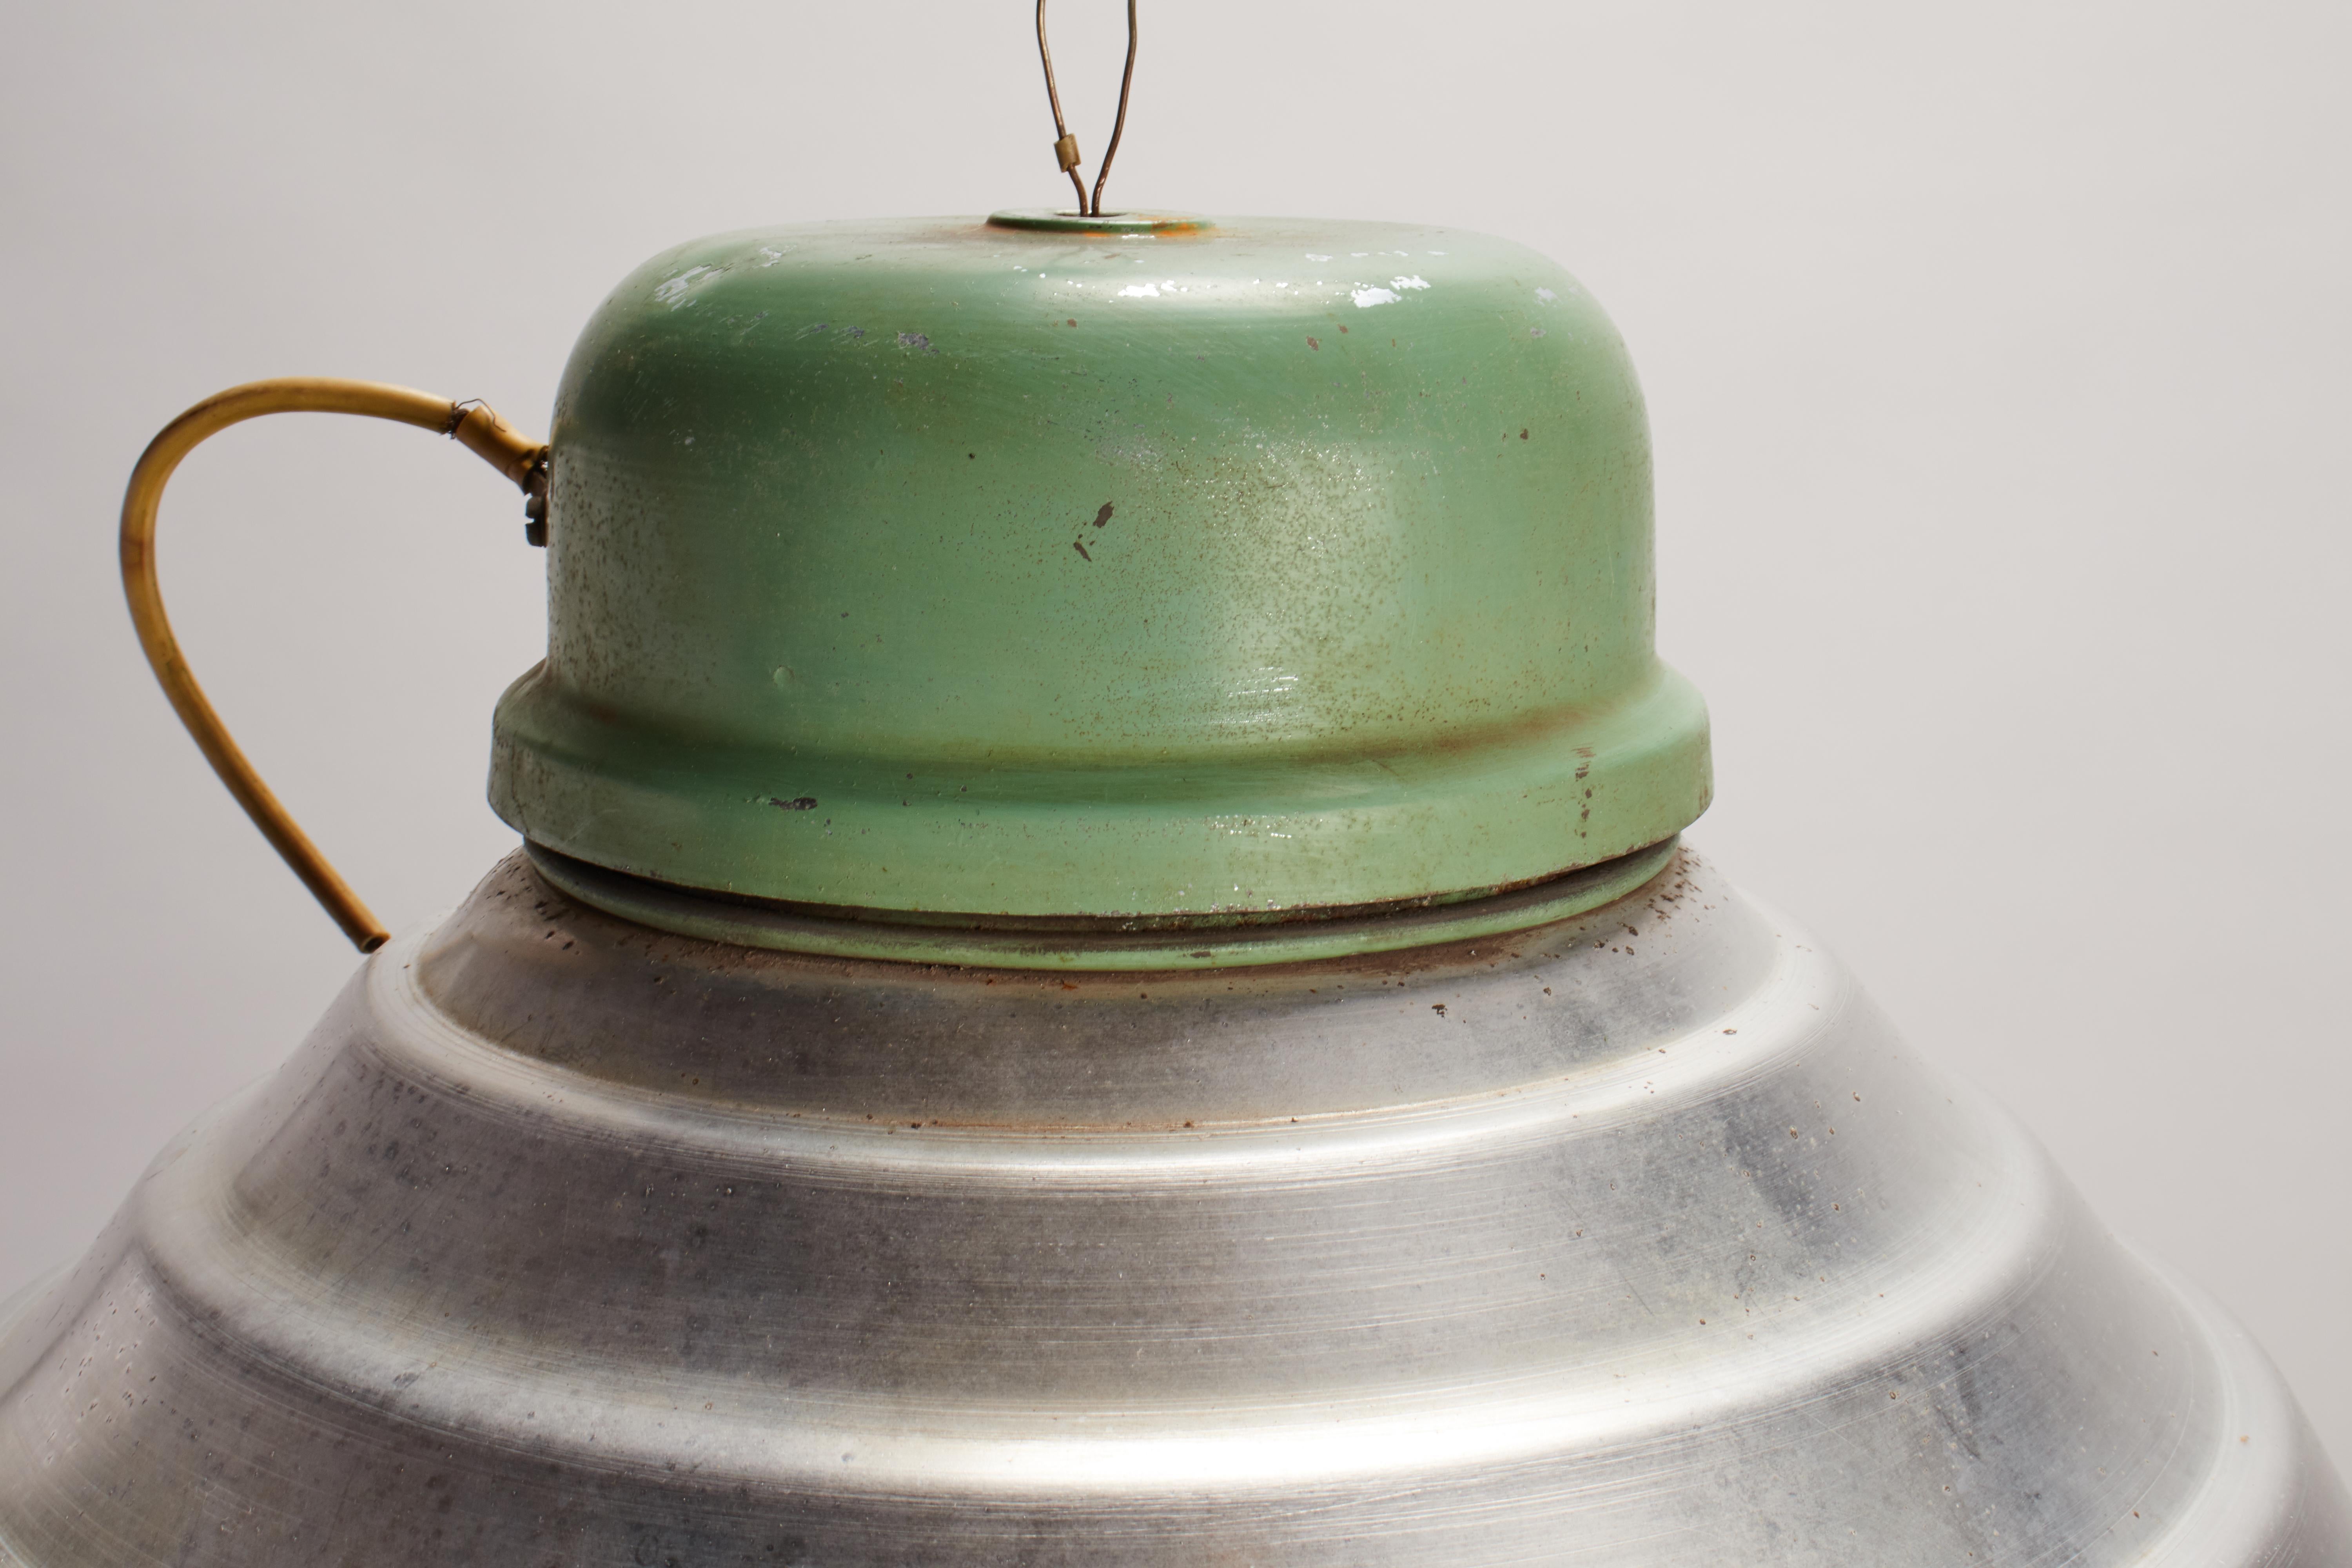 A group of swinging industrial lamps, green enamel over aluminum dome. Iron hanging hook, porcelain wheel metal wire. Sold also separately. Italy 1920 ca.